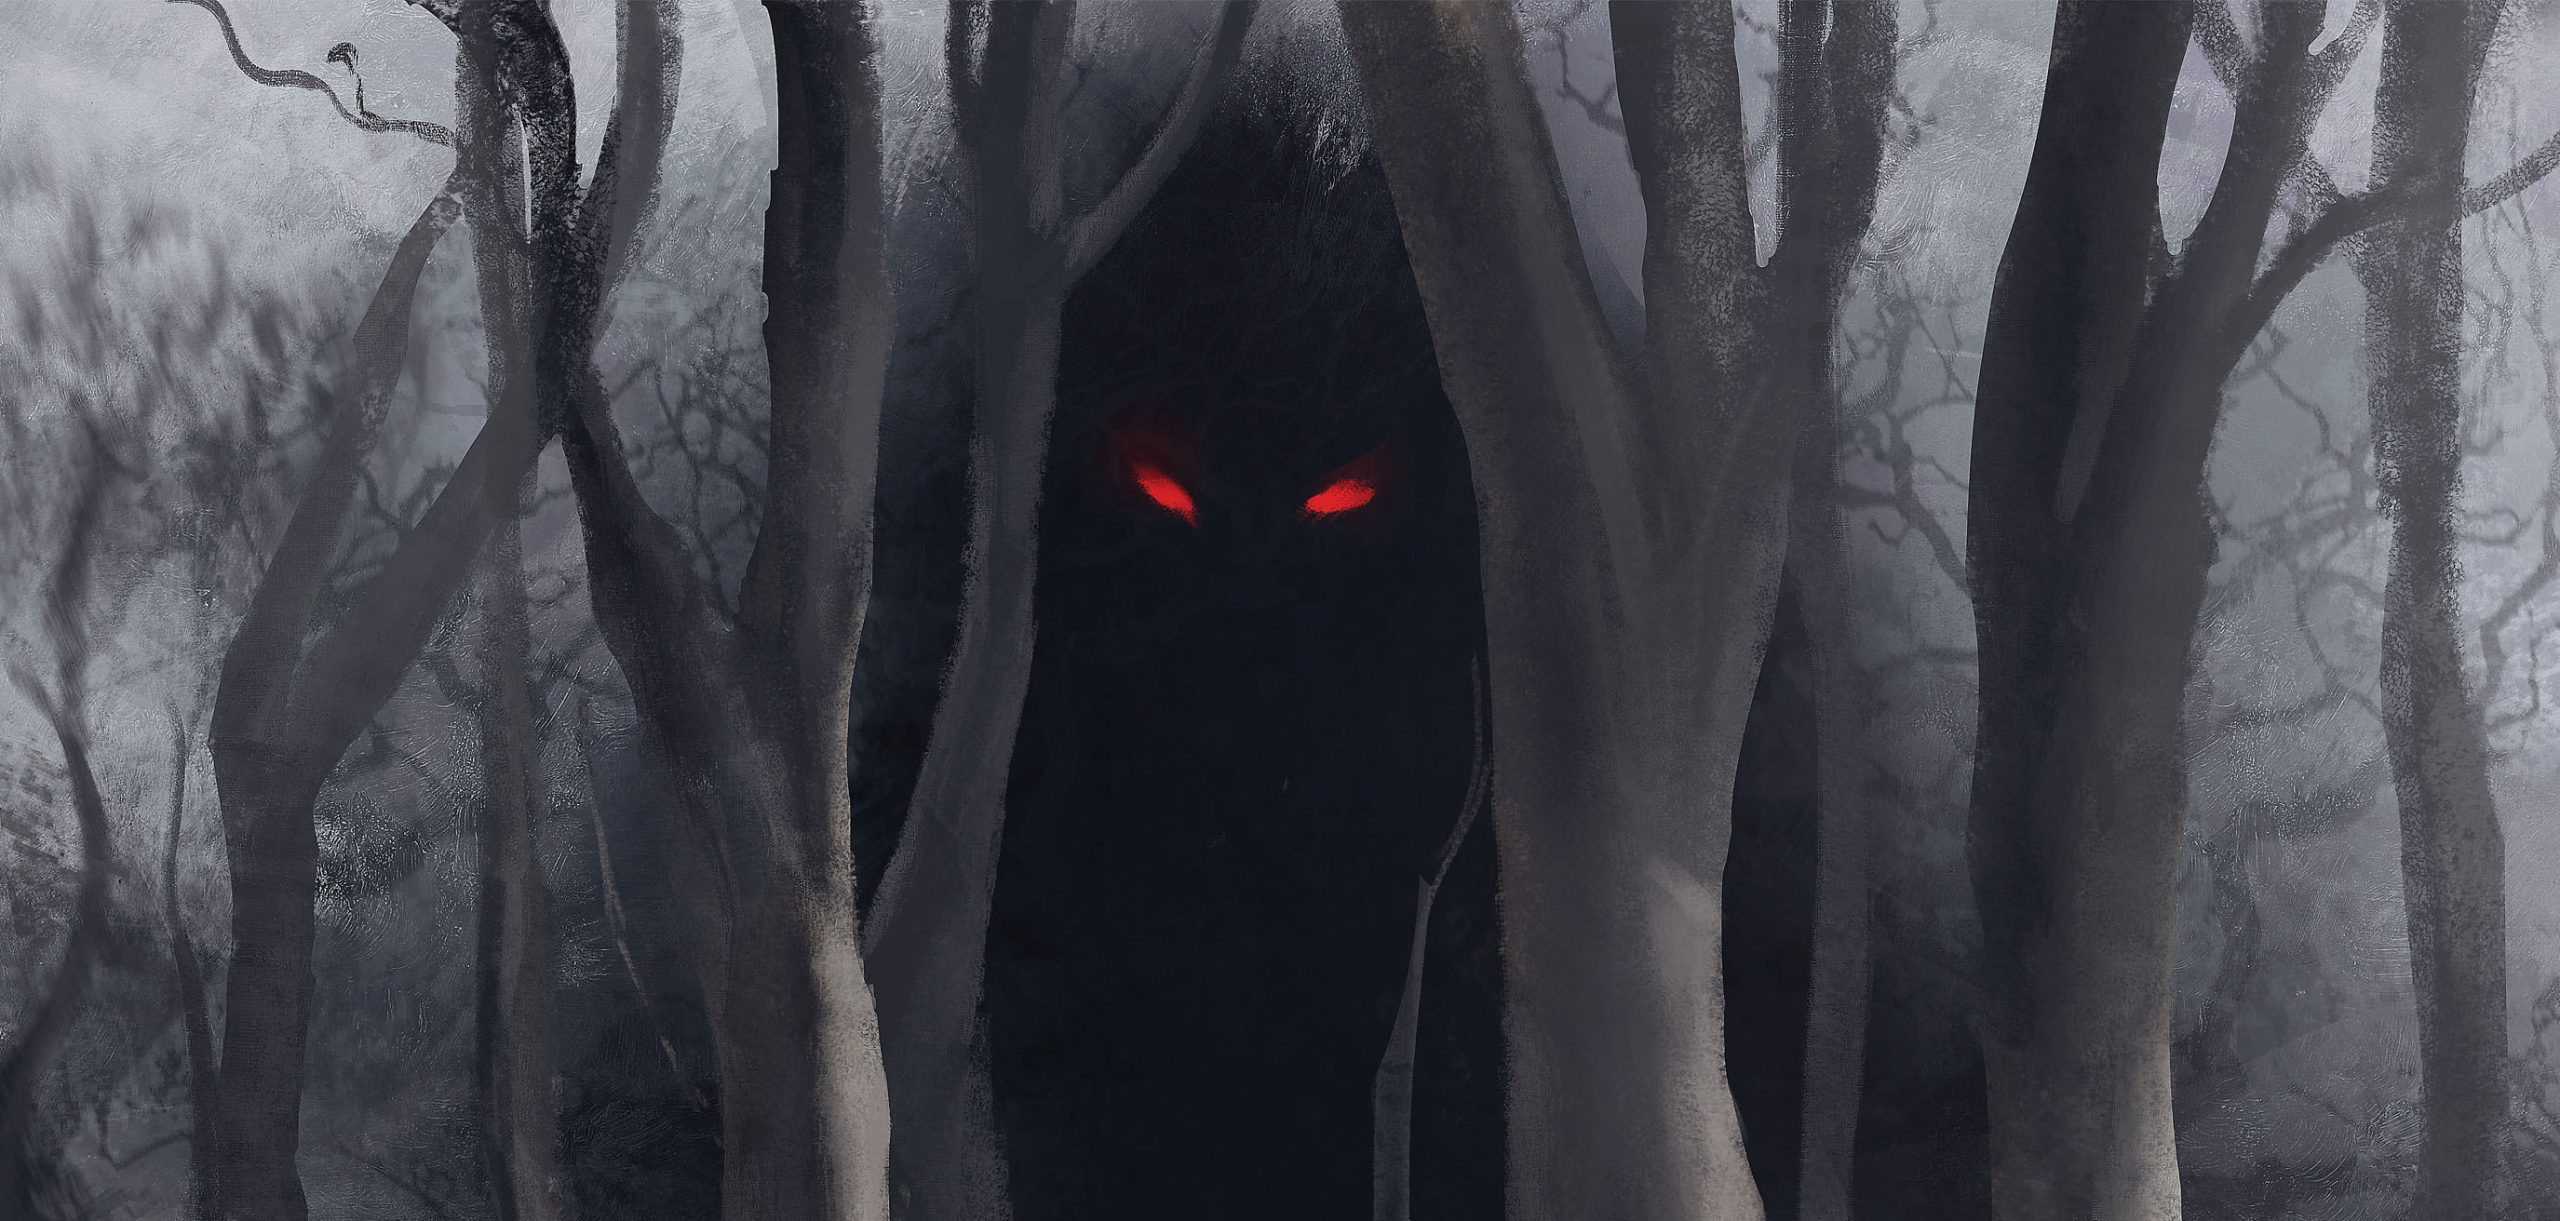 'Hunt for the Skinwalker' gets comics adaptation by Zac Thompson and Valeria Burzo